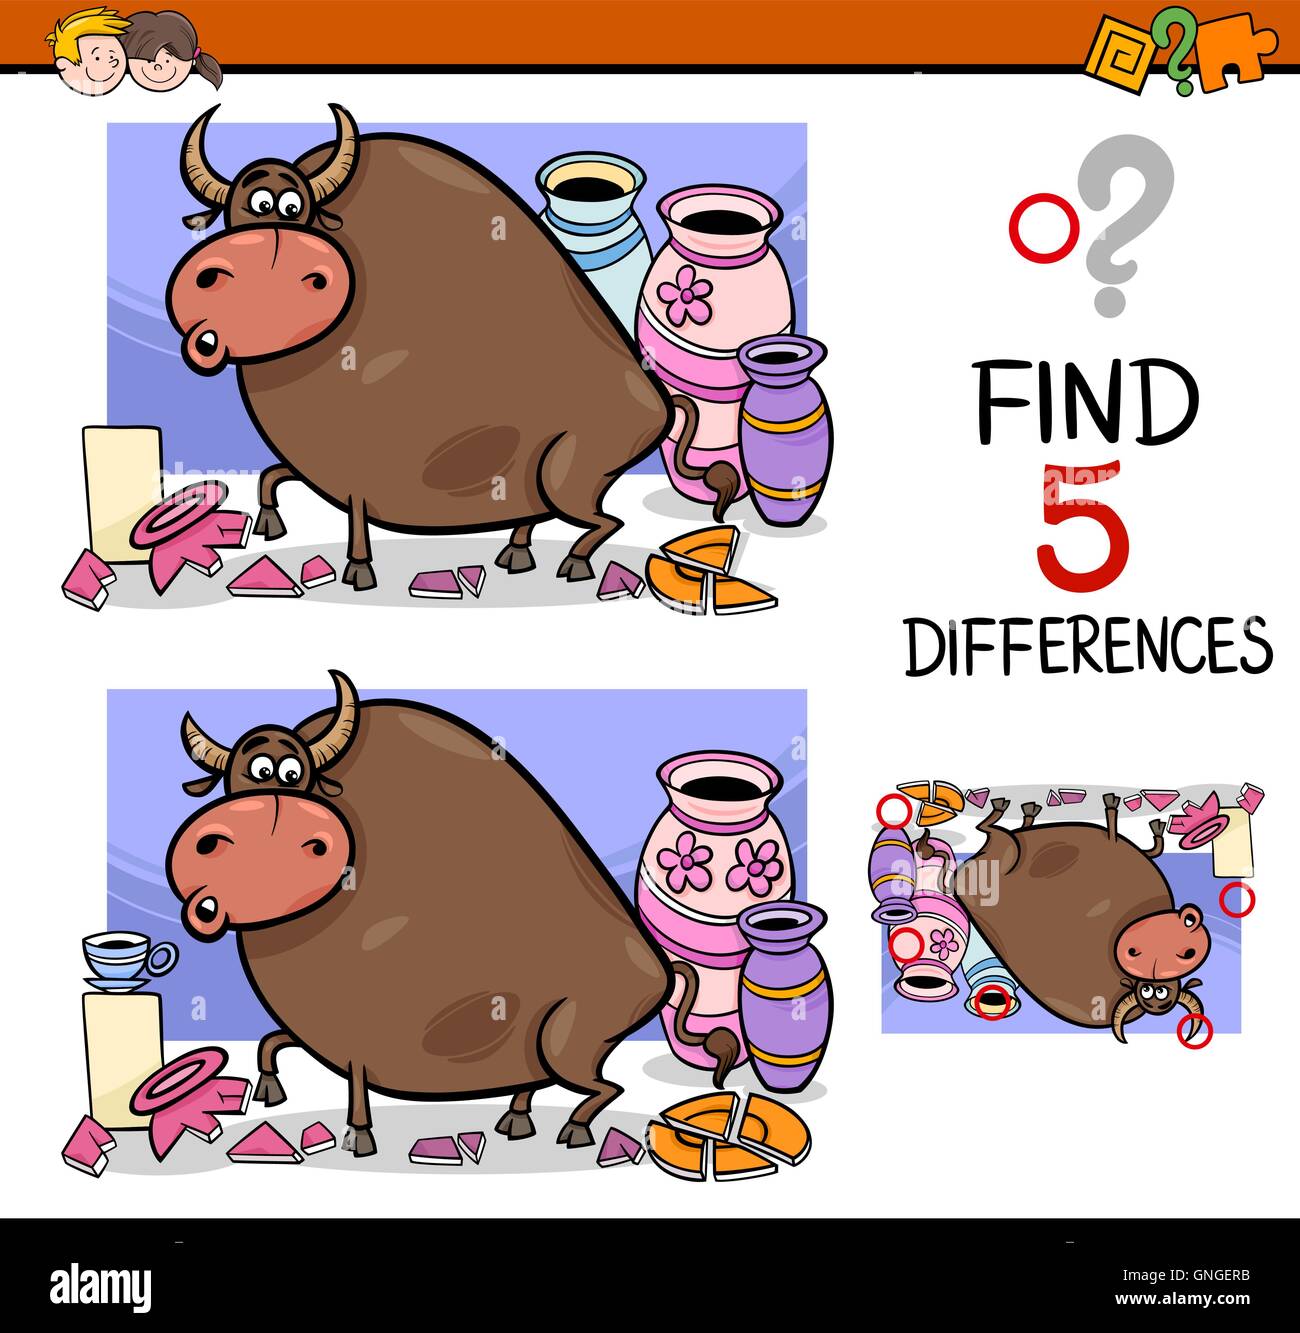 differences activity for kids Stock Vector